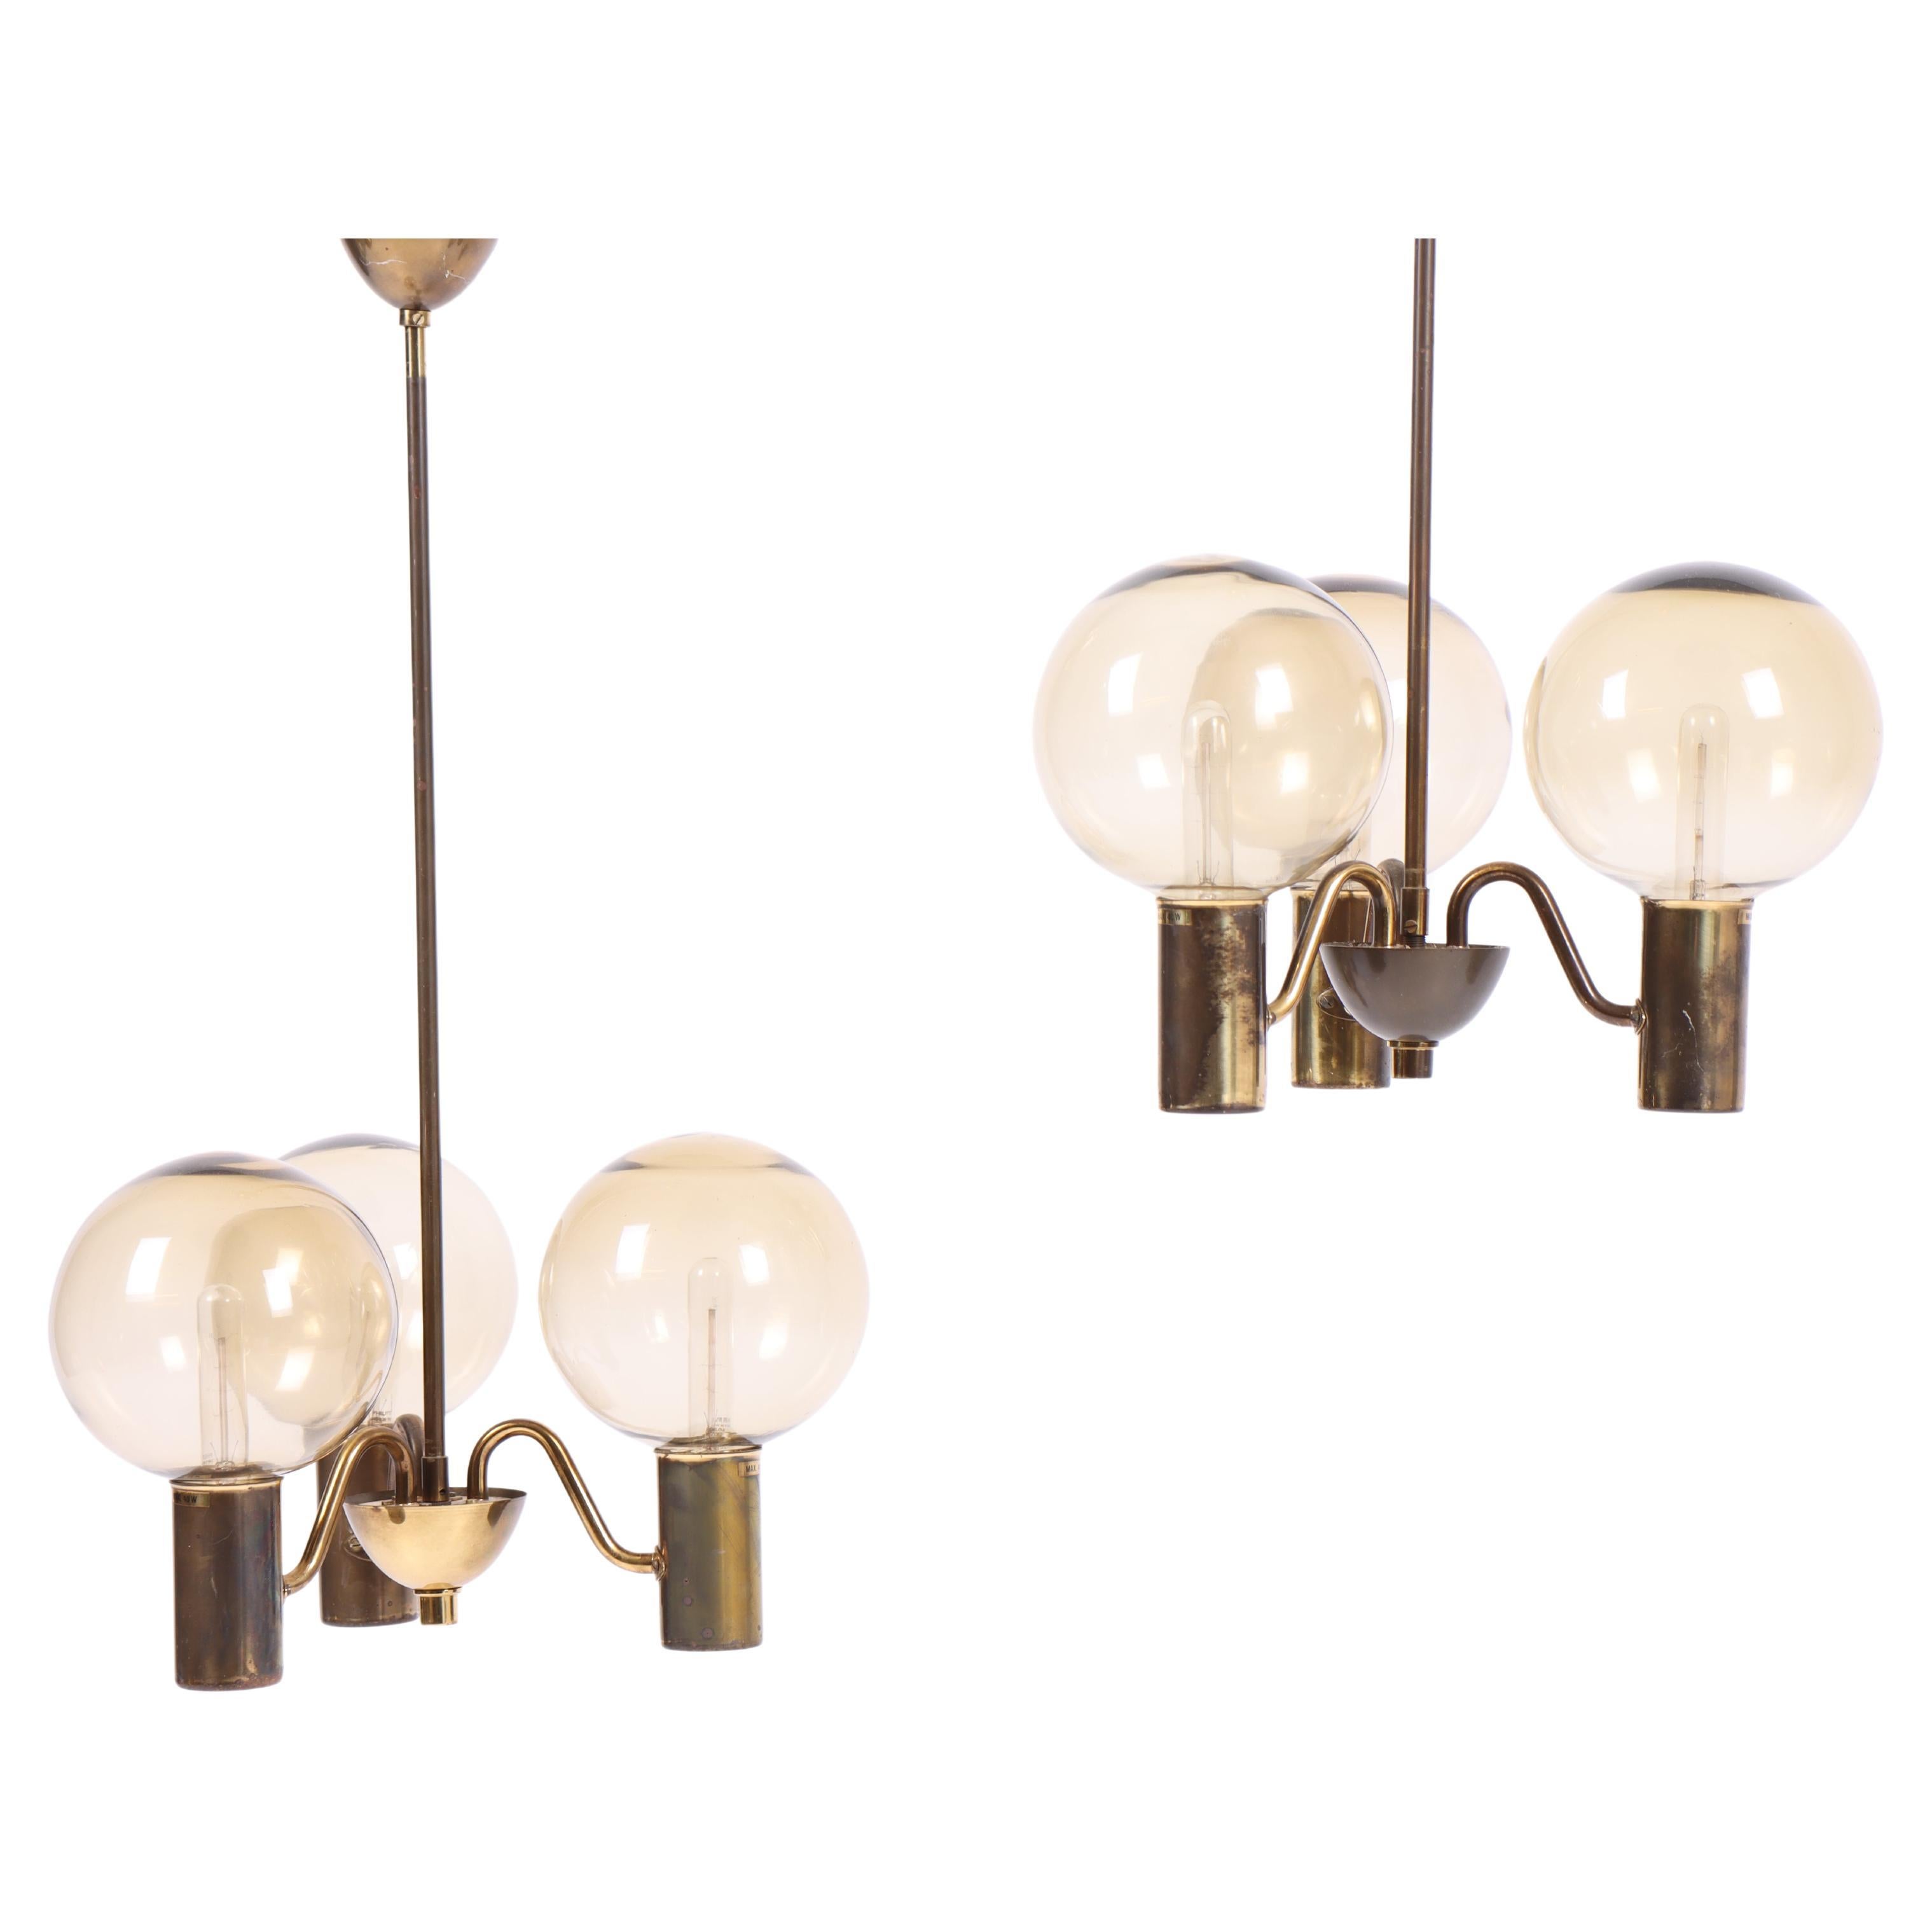 Pair of Midcentury "Patricia" Chandeliers by Hans-Agne Jakobsson